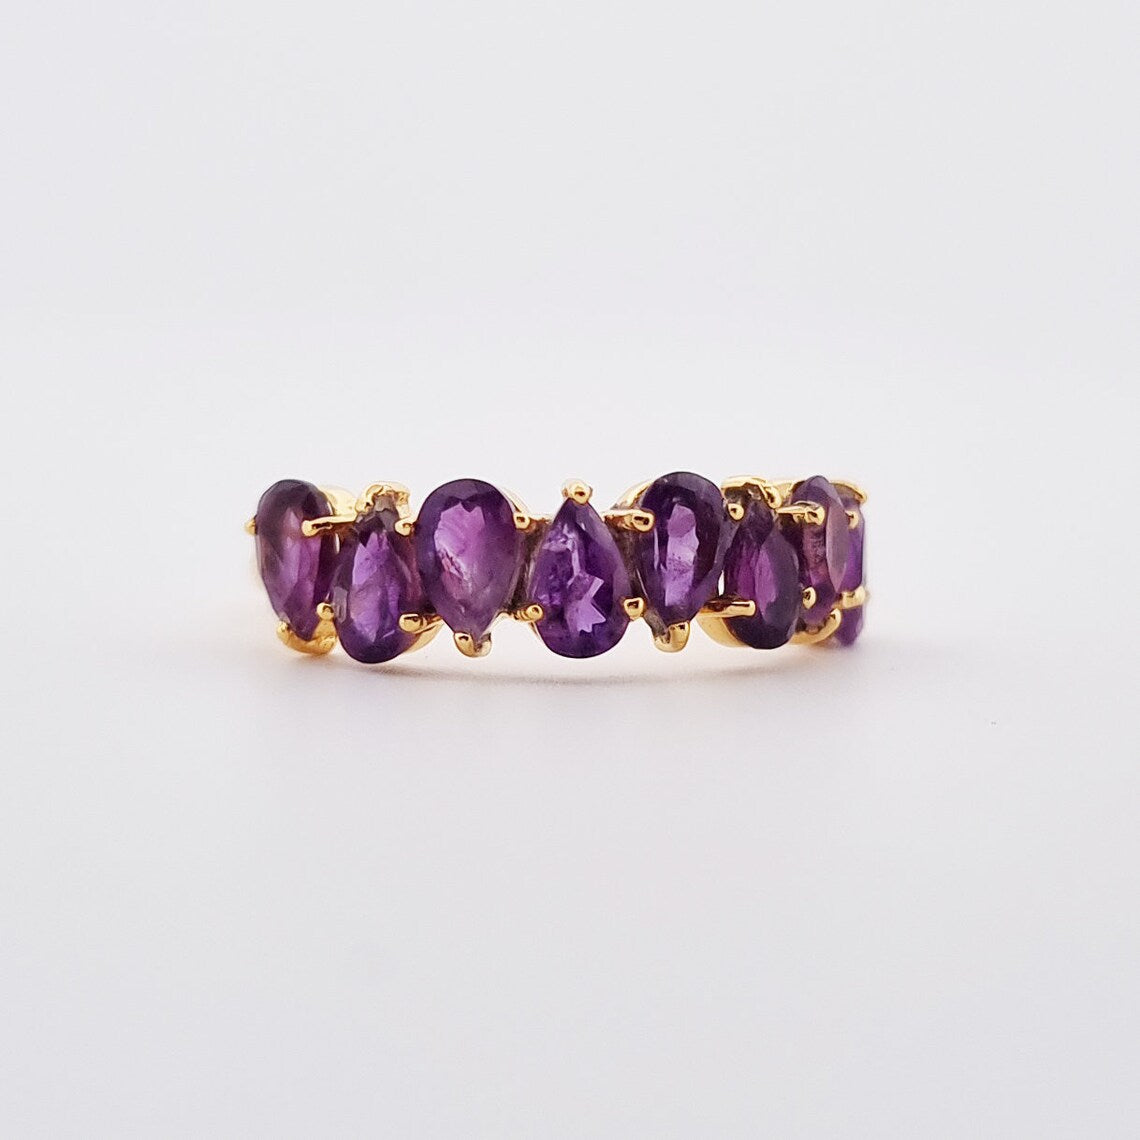 Gold Plated on 925 Sterling Silver - Amethyst Ring - February Birthstone Ring - promise ring, wedding ring, friendship ring